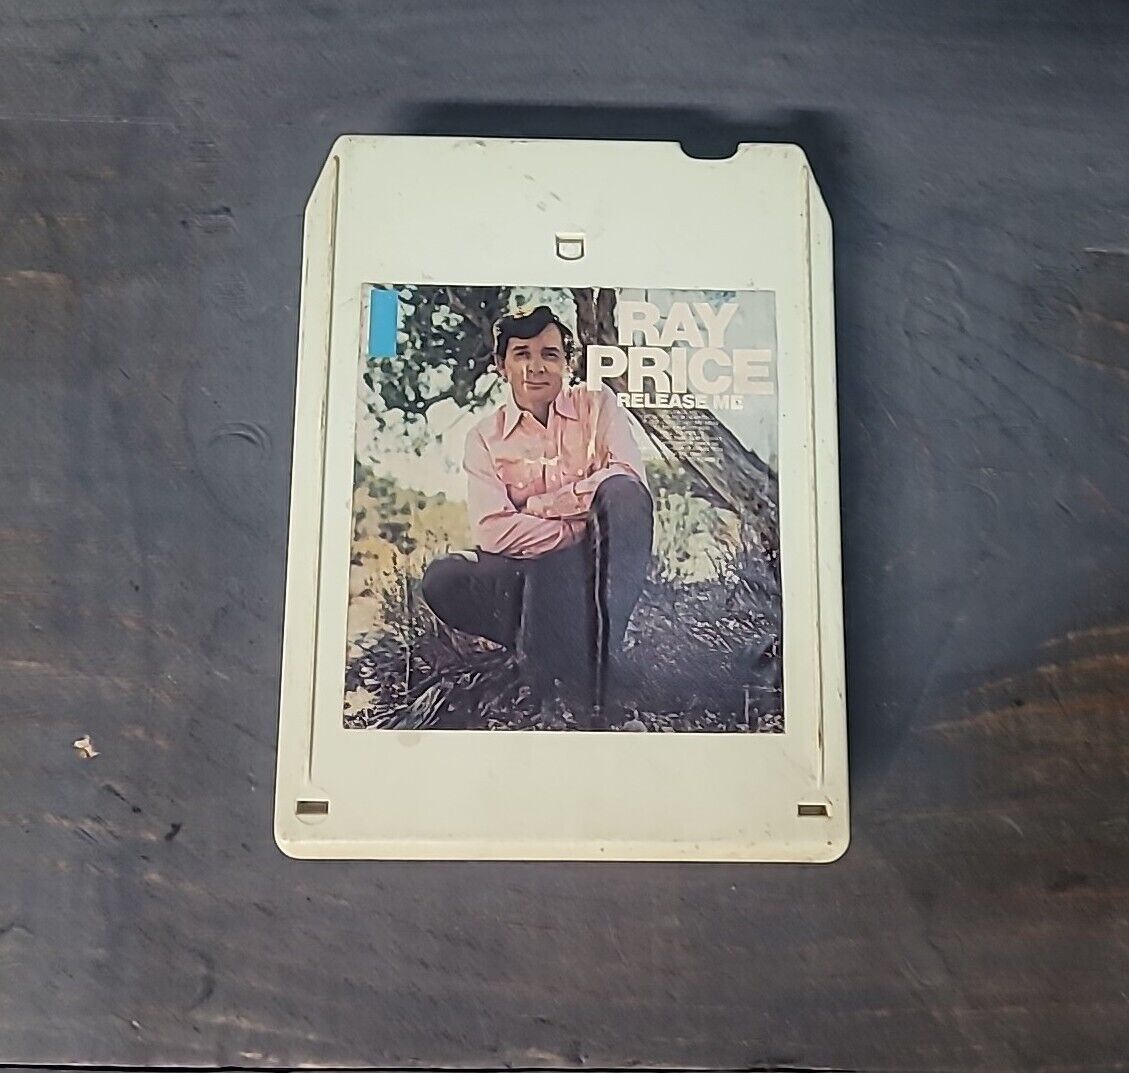 RARE Ray Price 8 Track Tape RELEASE ME -BA 13254 VINTAGE LOOK 1976 CBS GREAT